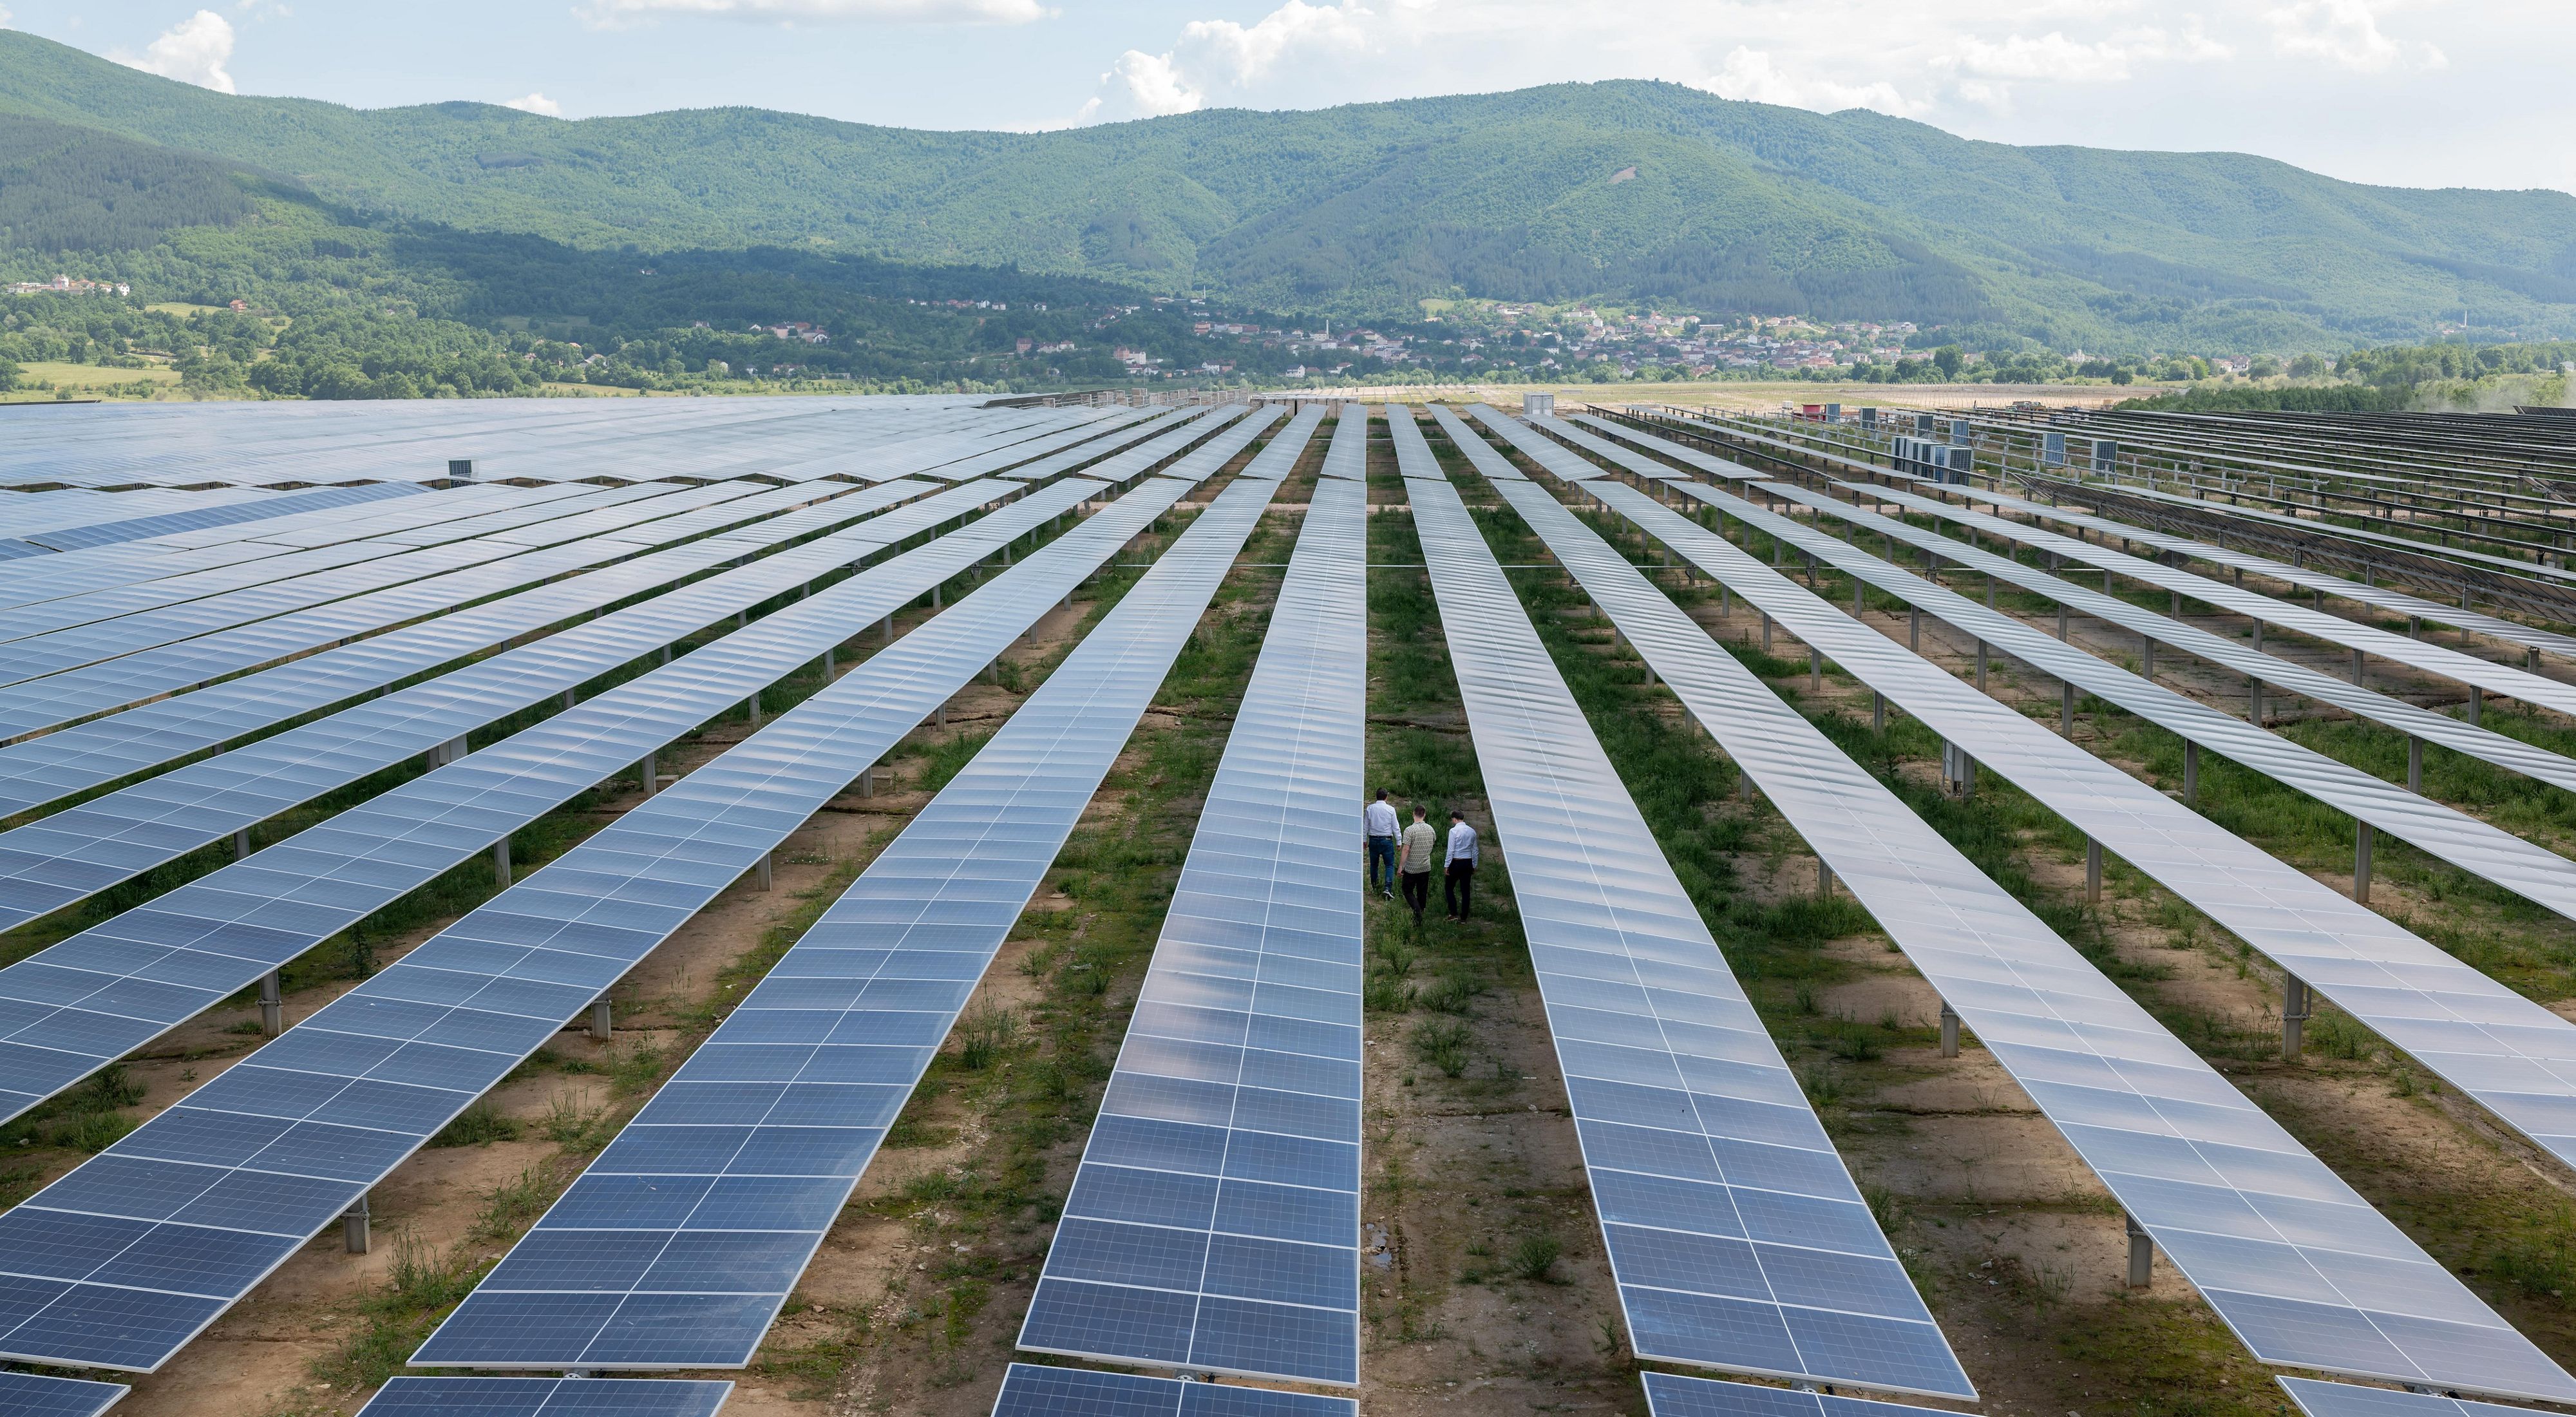 Aerial view of people walking among rows of solar panels.